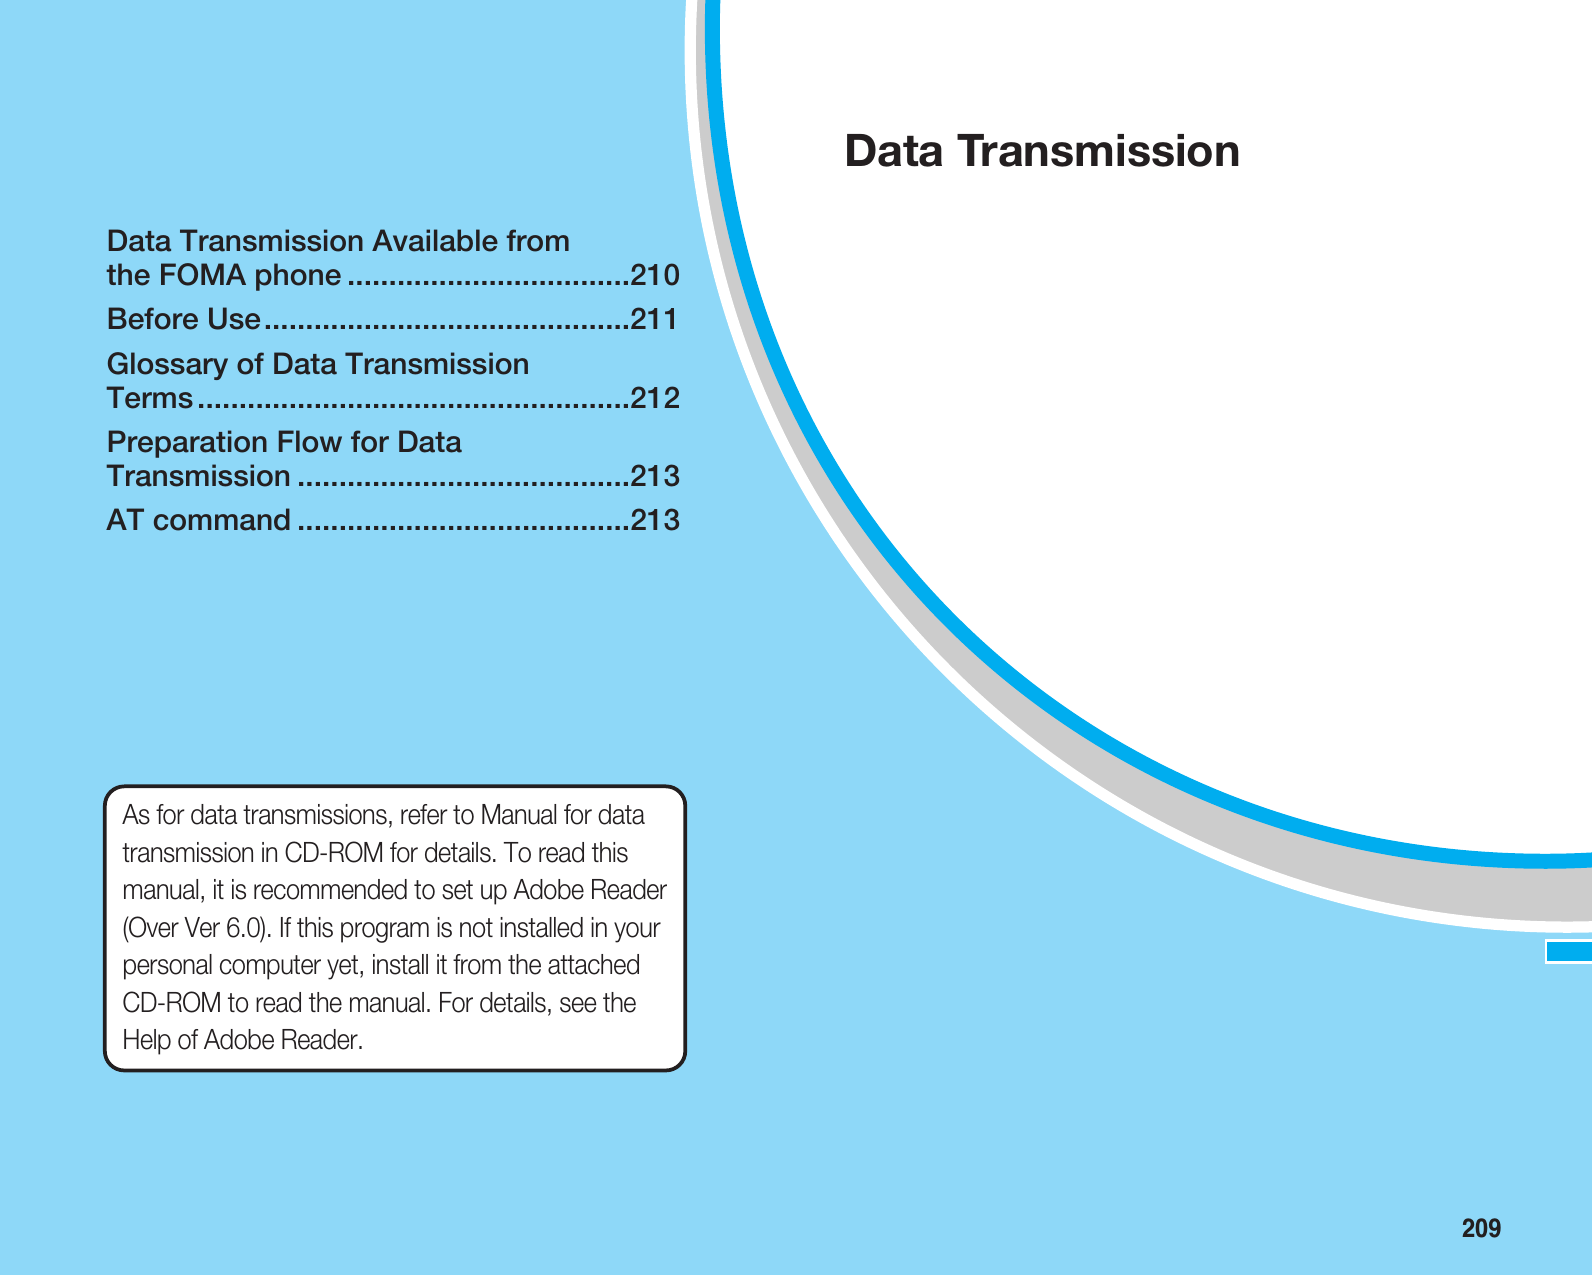 209Data Transmission Available from the FOMA phone ..................................210Before Use............................................211Glossary of Data Transmission Terms ....................................................212Preparation Flow for Data Transmission ........................................213AT command ........................................213Data TransmissionAs for data transmissions, refer to Manual for datatransmission in CD-ROM for details. To read thismanual, it is recommended to set up Adobe Reader(Over Ver 6.0). If this program is not installed in yourpersonal computer yet, install it from the attachedCD-ROM to read the manual. For details, see theHelp of Adobe Reader.